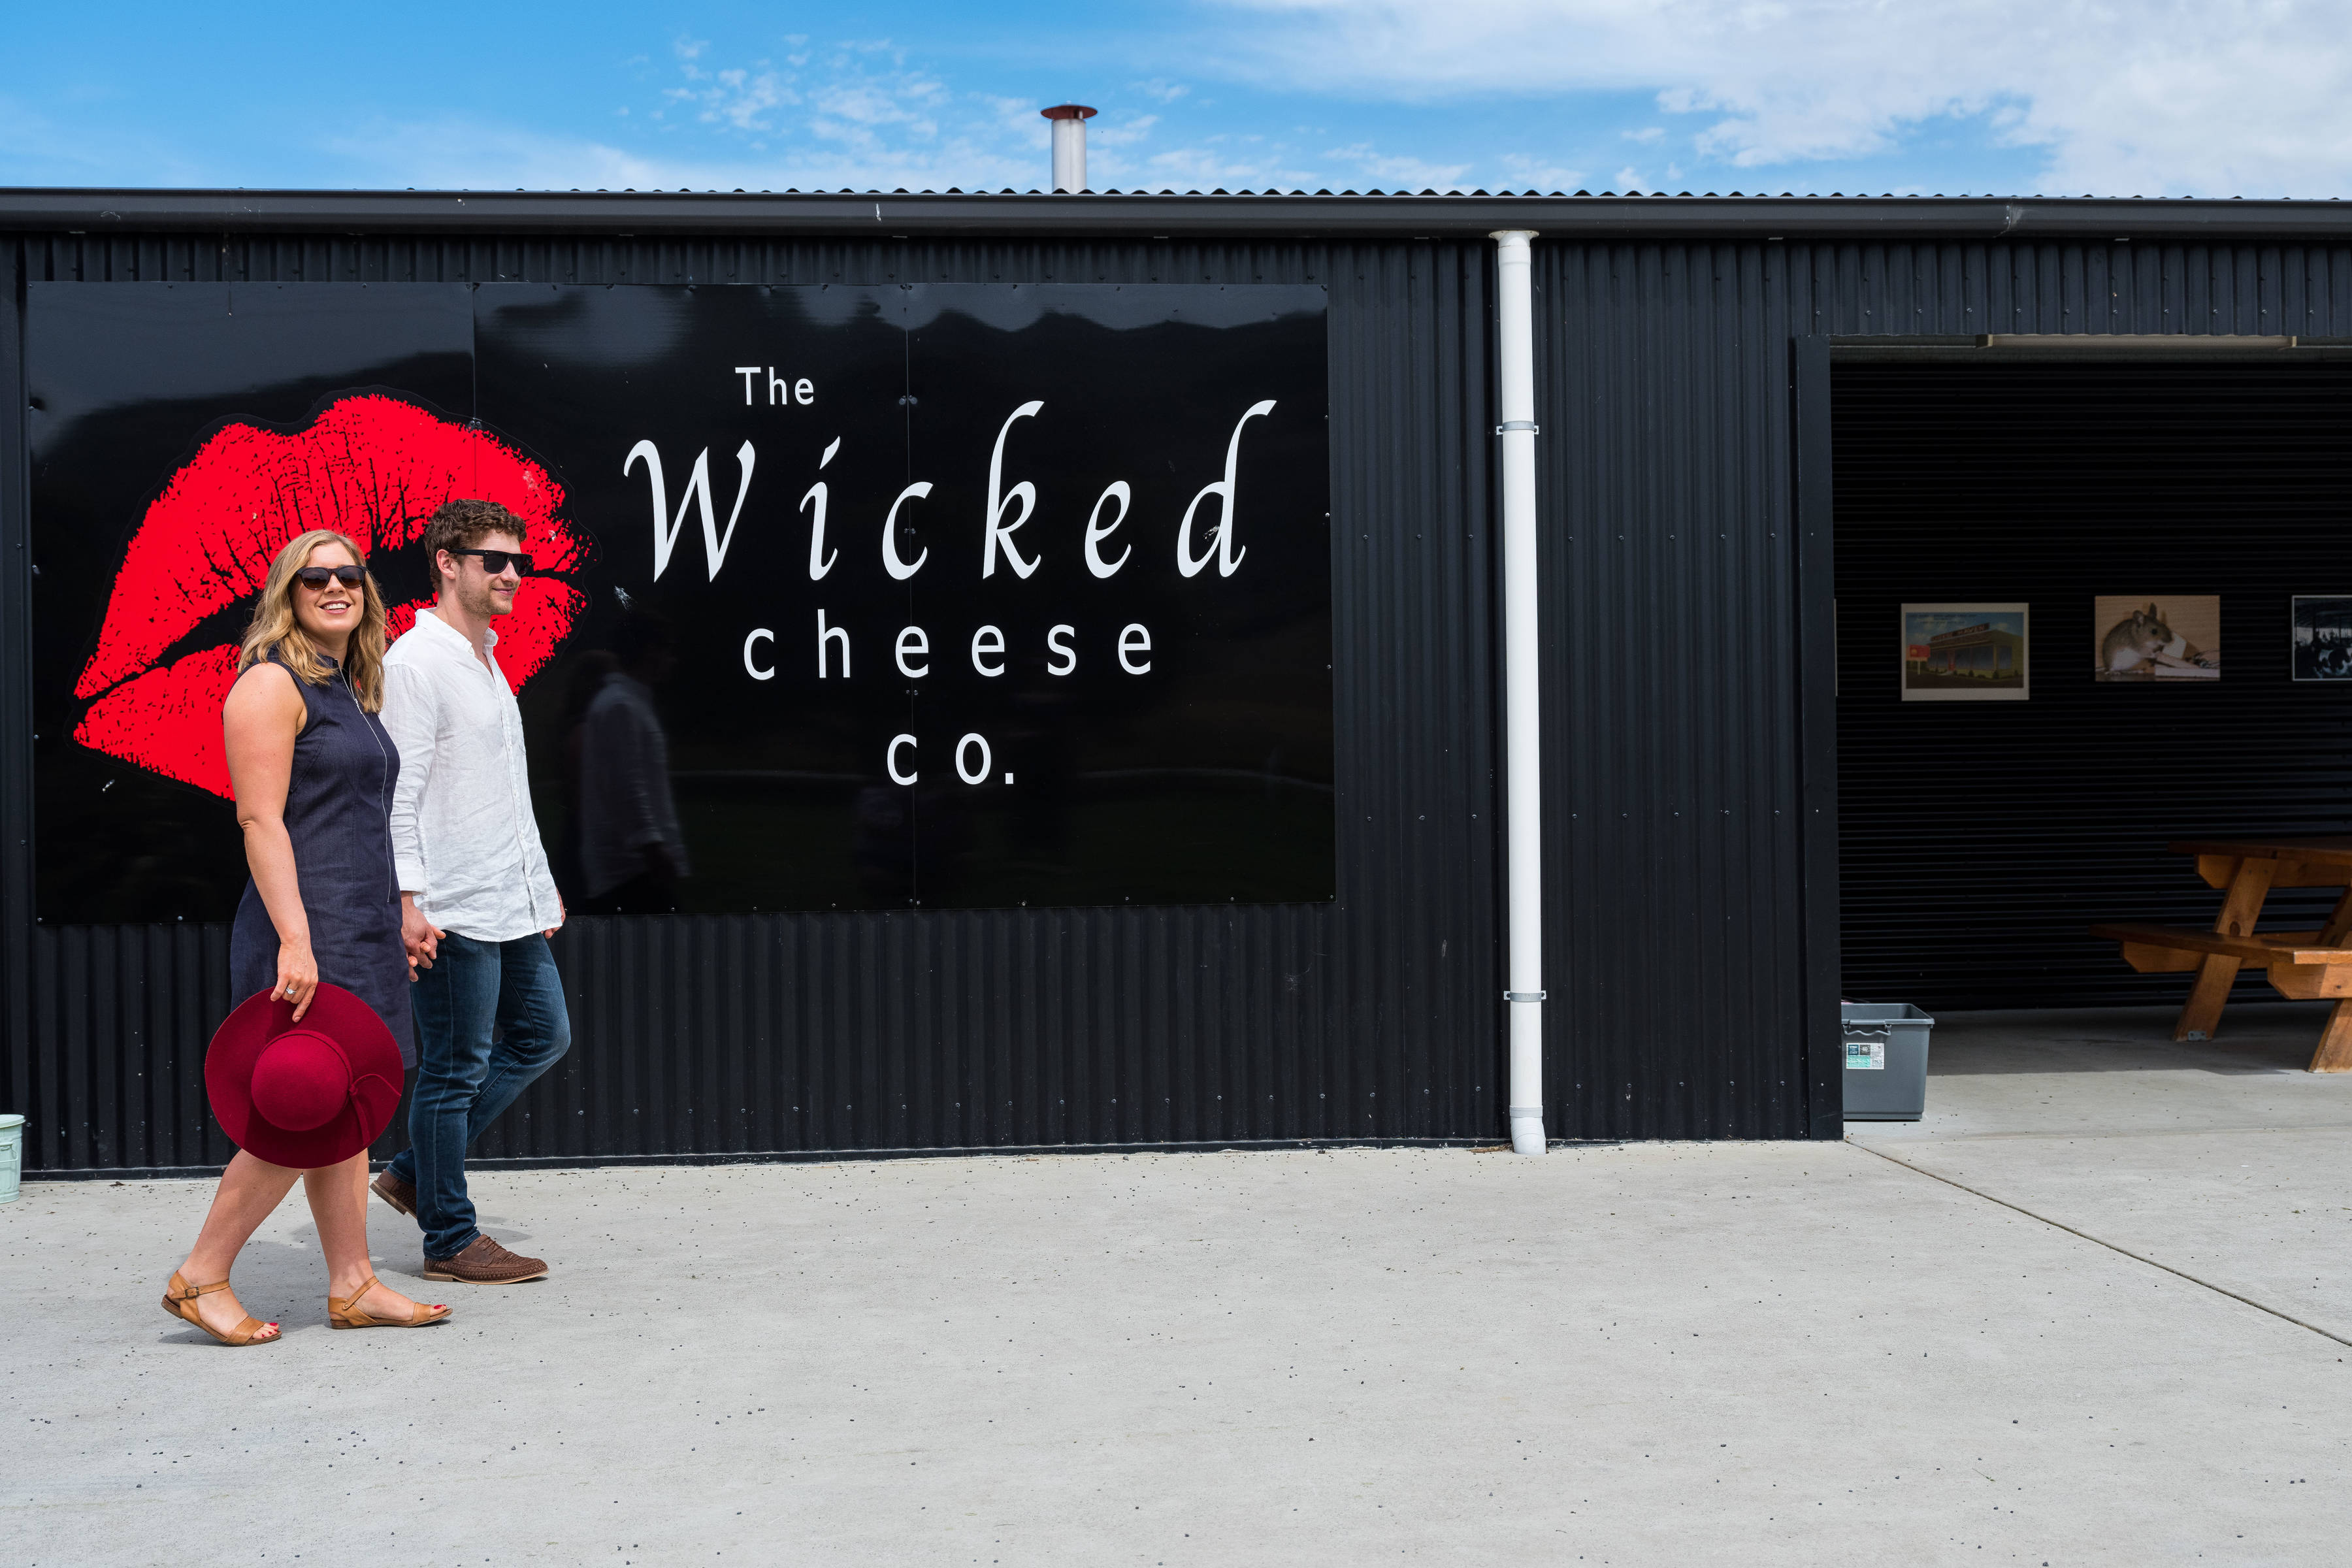 Wicked Cheese front entrance. The Wicked Cheese building is painted black with large black signage featuring the Wicked Cheese logo, consisting of red lips and white lettering. A man and a woman are walking in front of the sign.